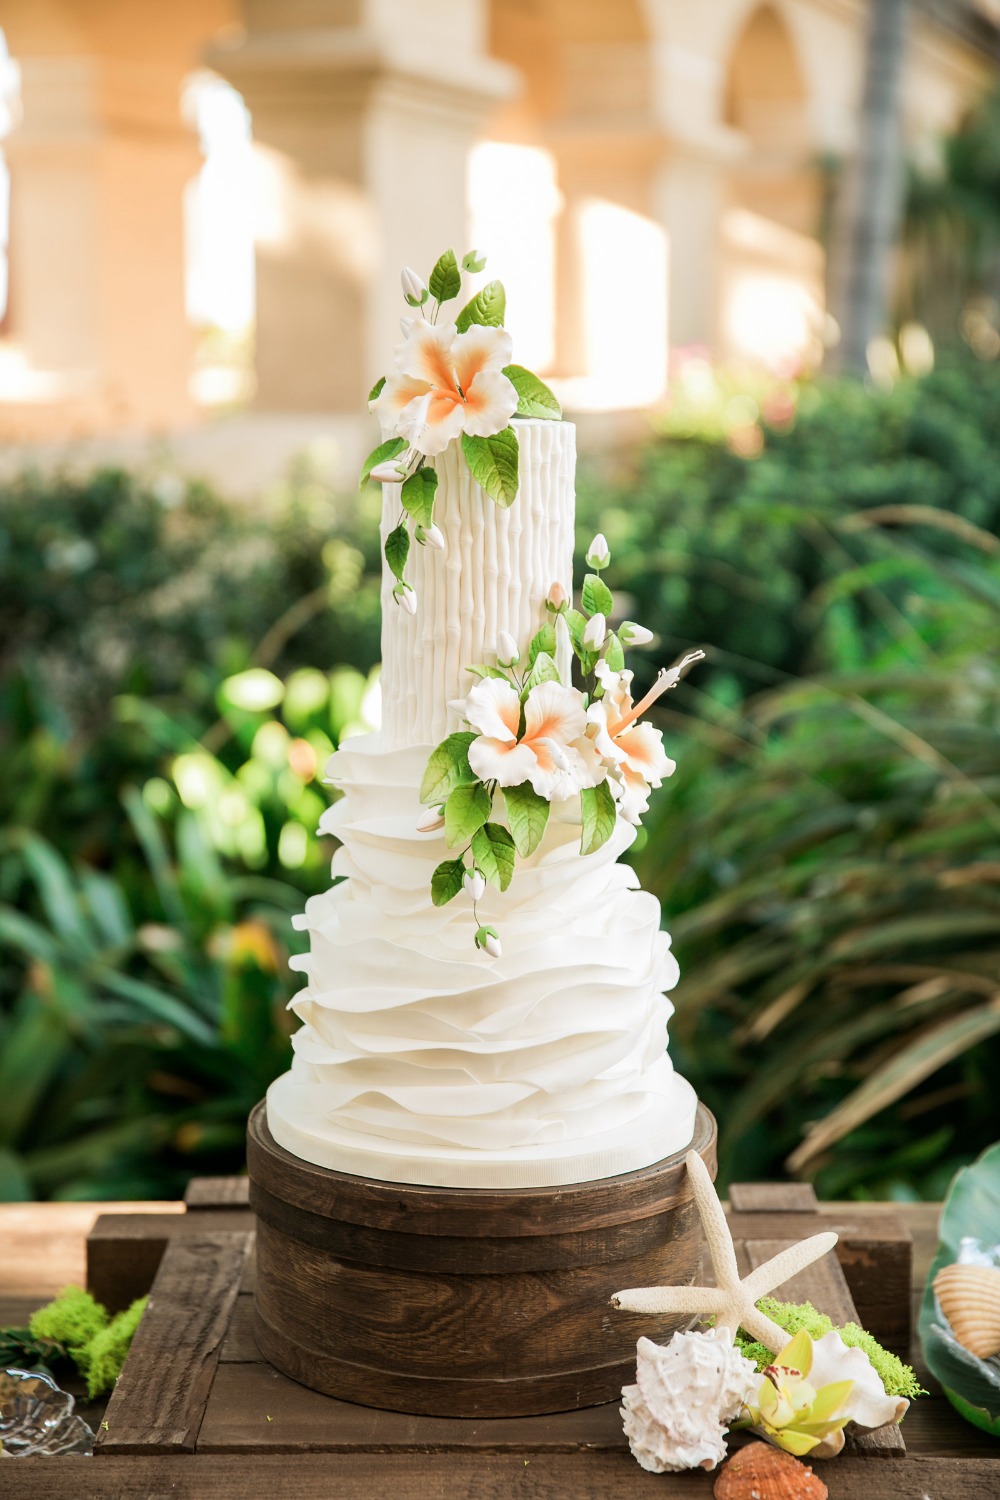 Tropical white wedding cake with flowers